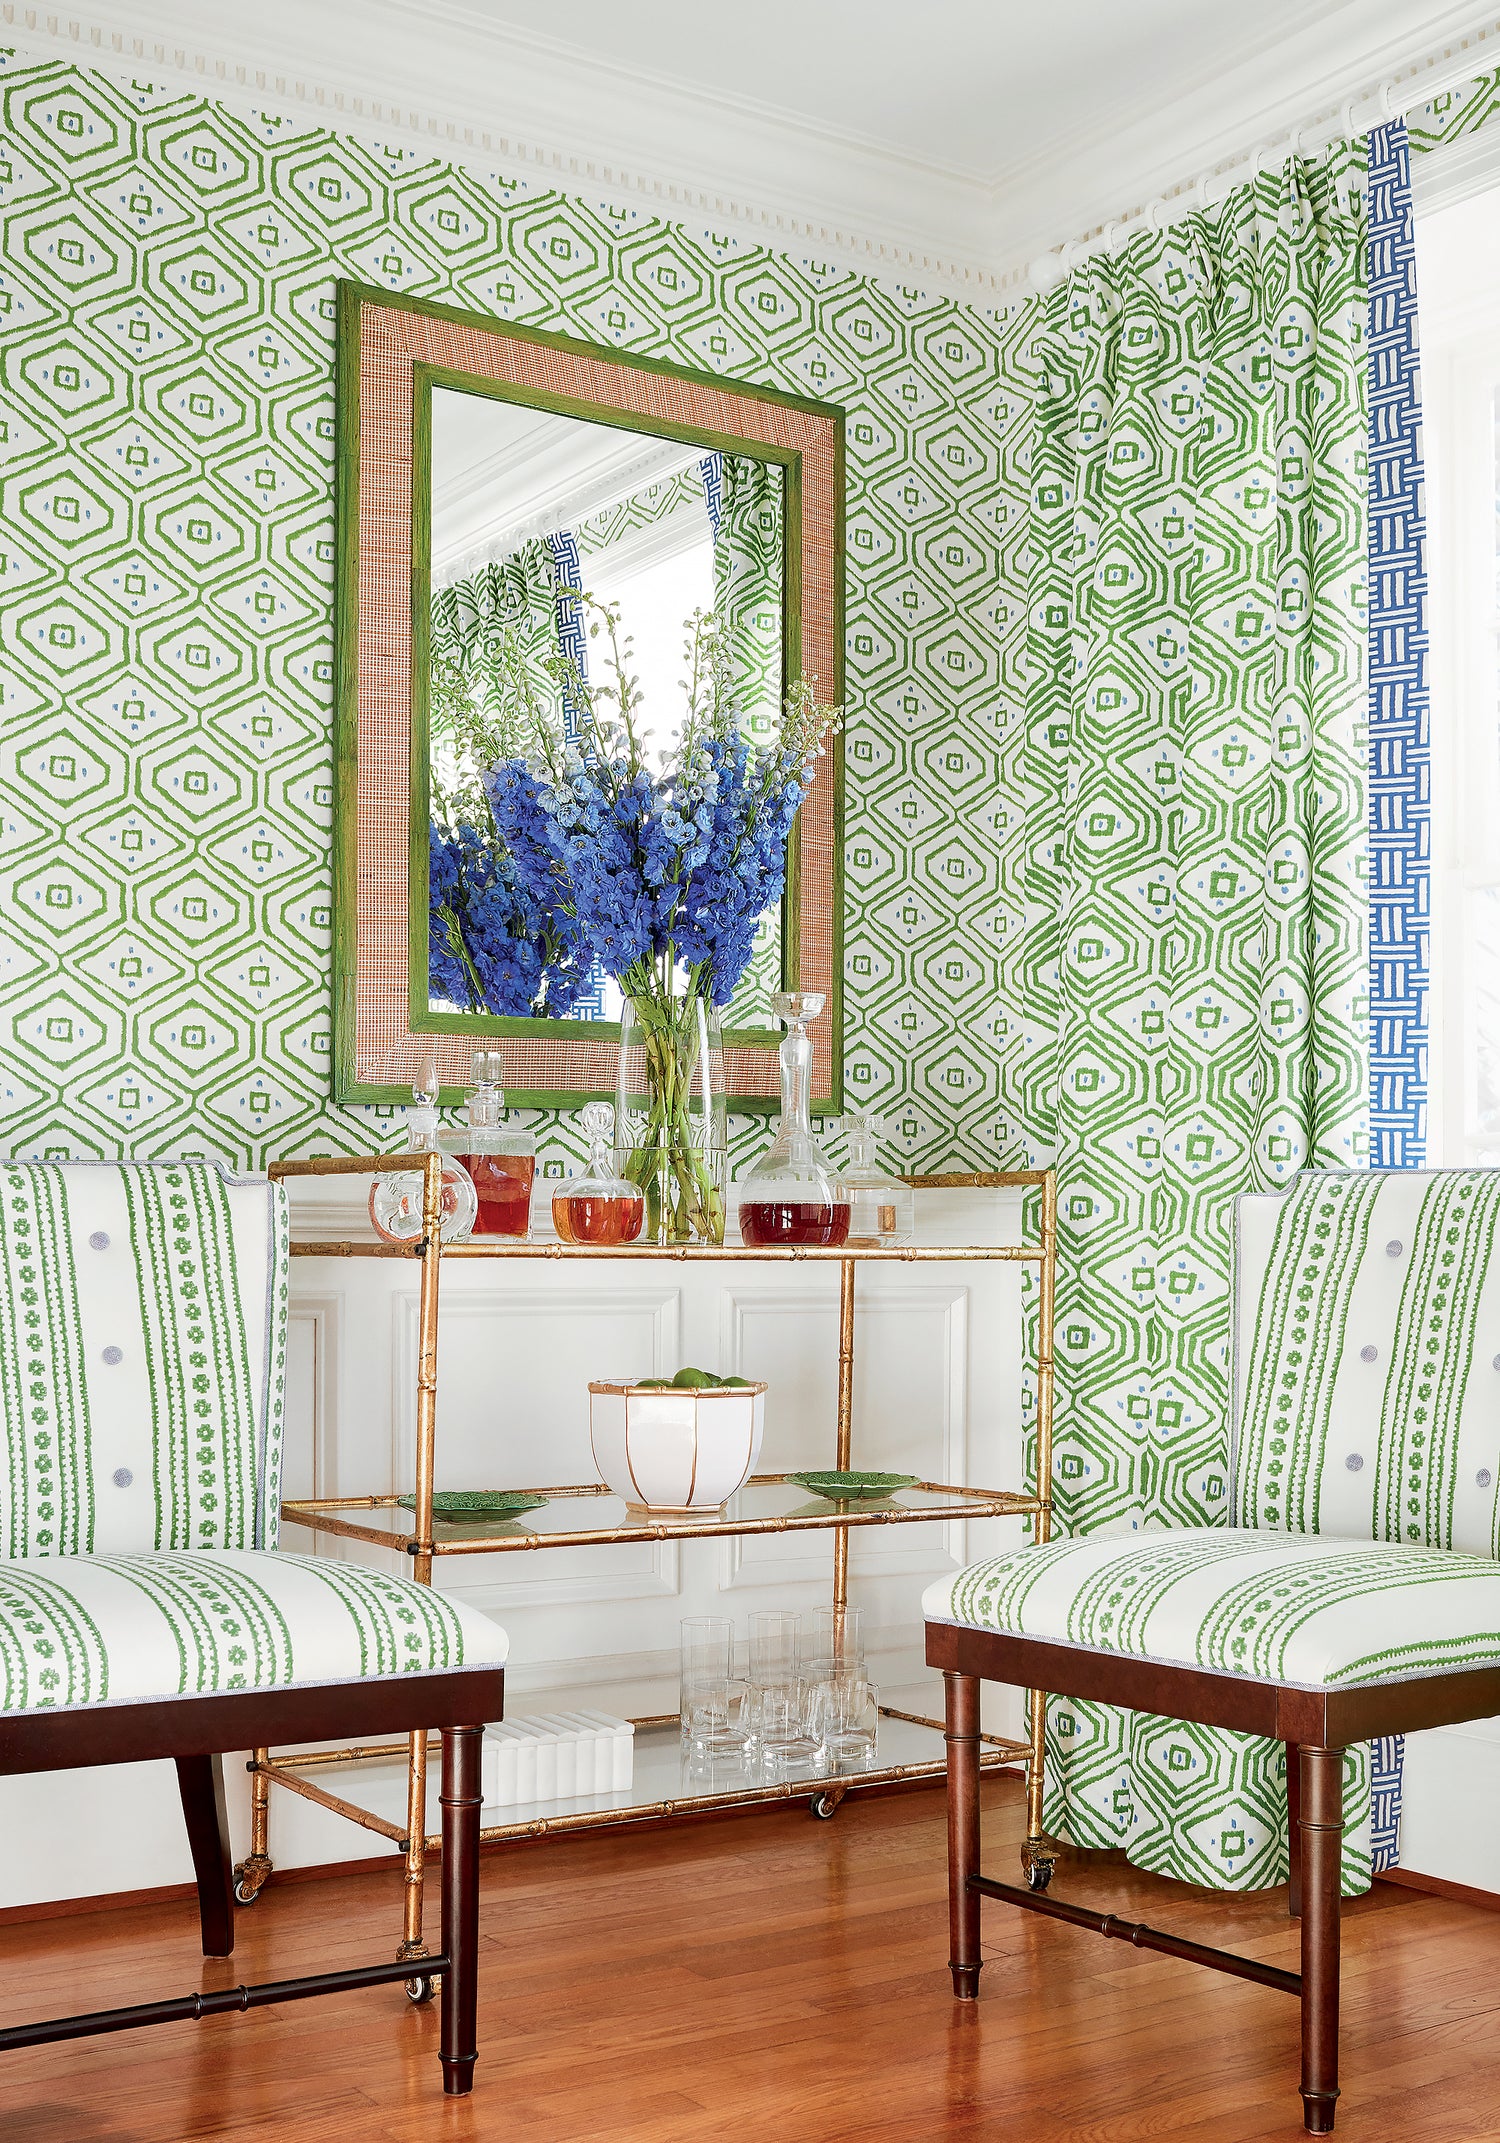 Living room with stirling dining chairs upholstered in Thibaut new haven stripe printed fabric in green color, pattern F910607